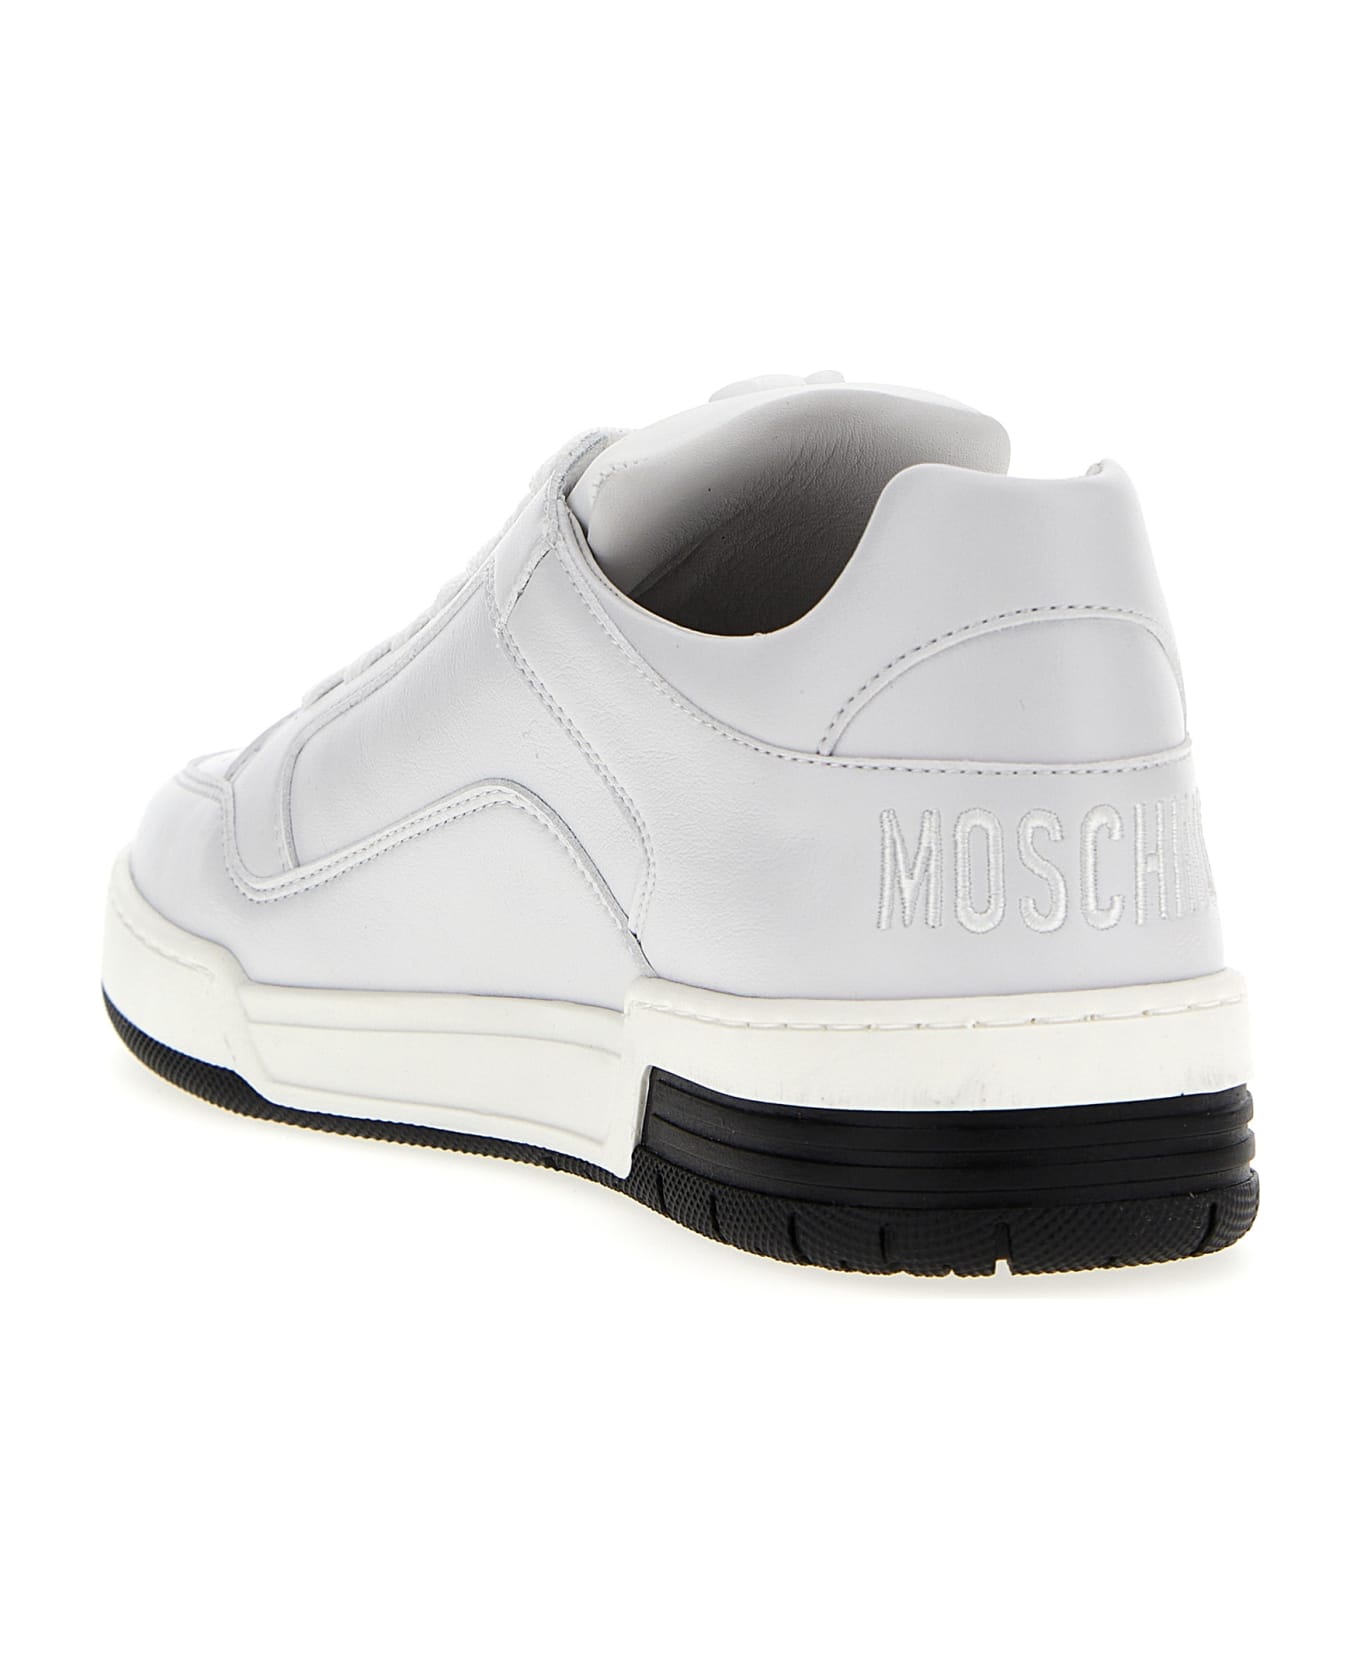 Moschino 'kevin' Sneakers - White